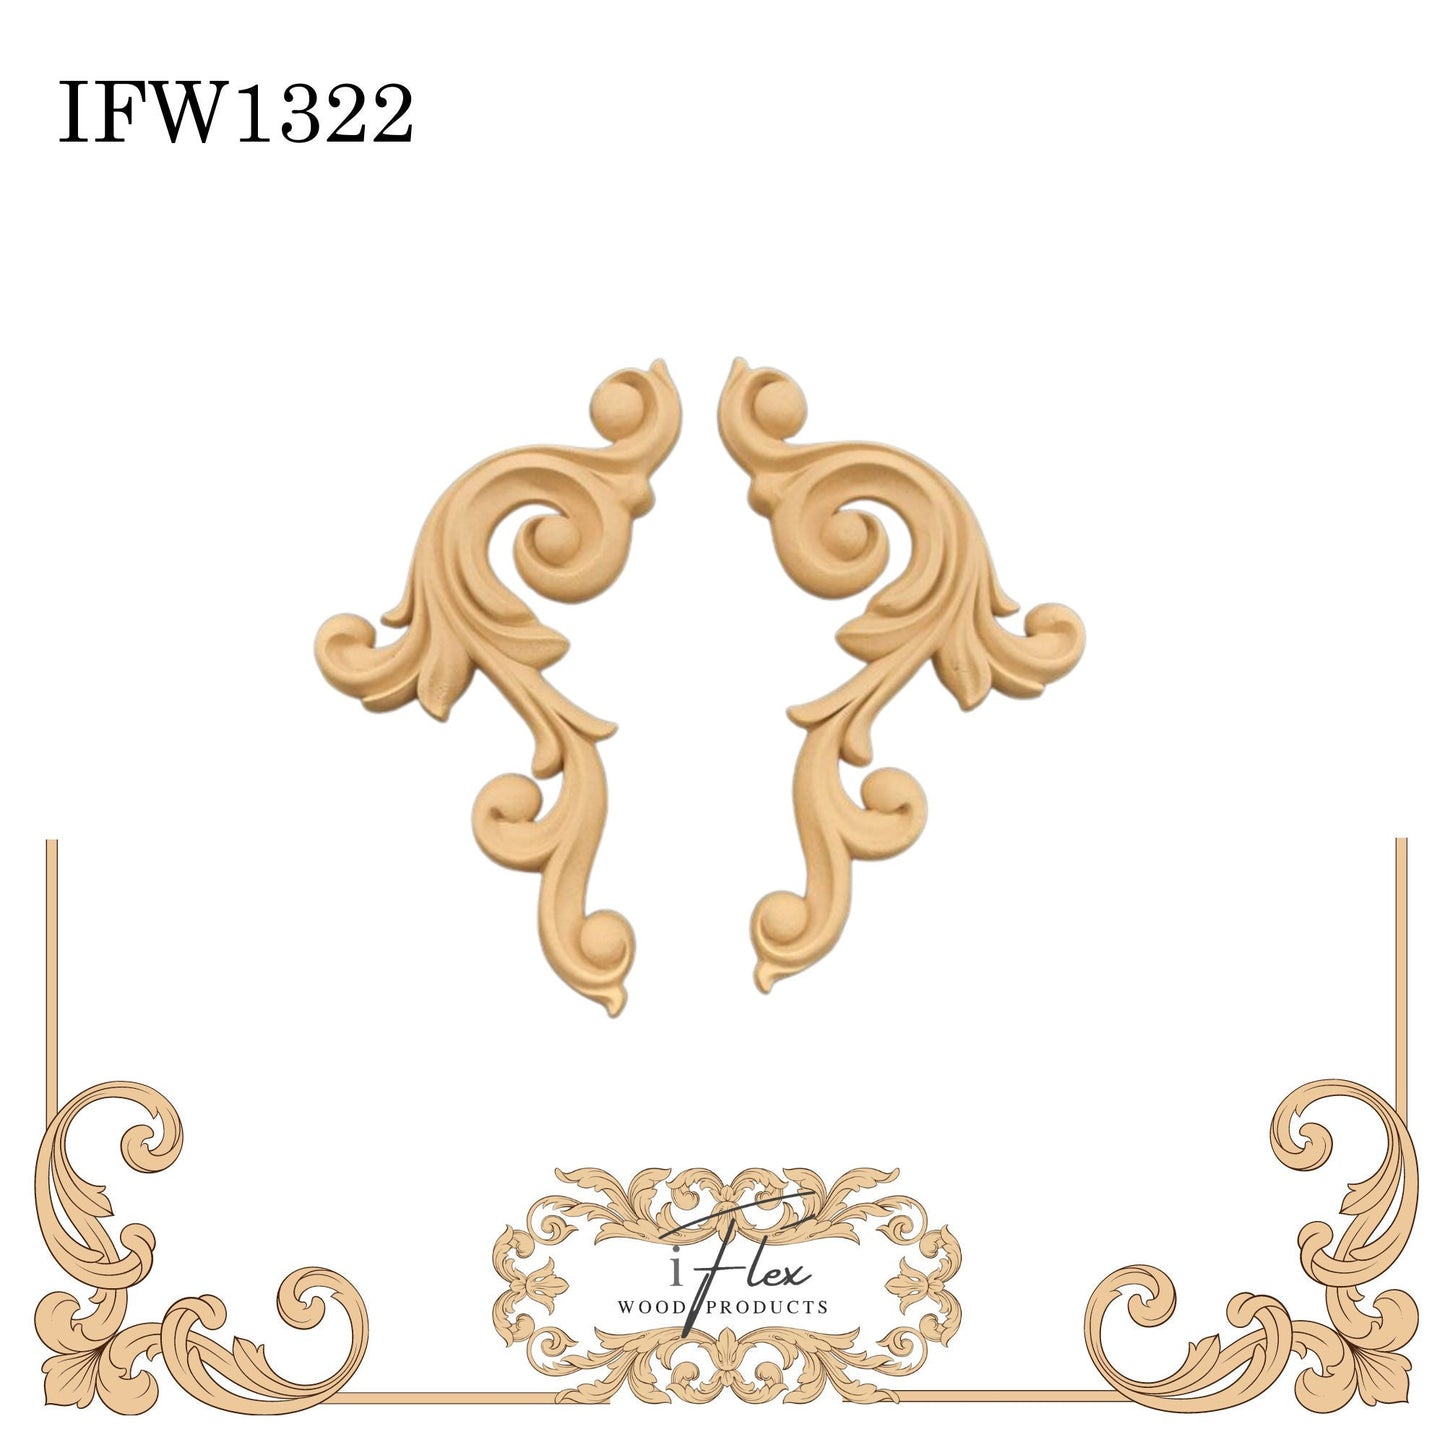 IFW 1322-1324 iFlex Wood Products, bendable mouldings, flexible, wooden appliques, scroll pair